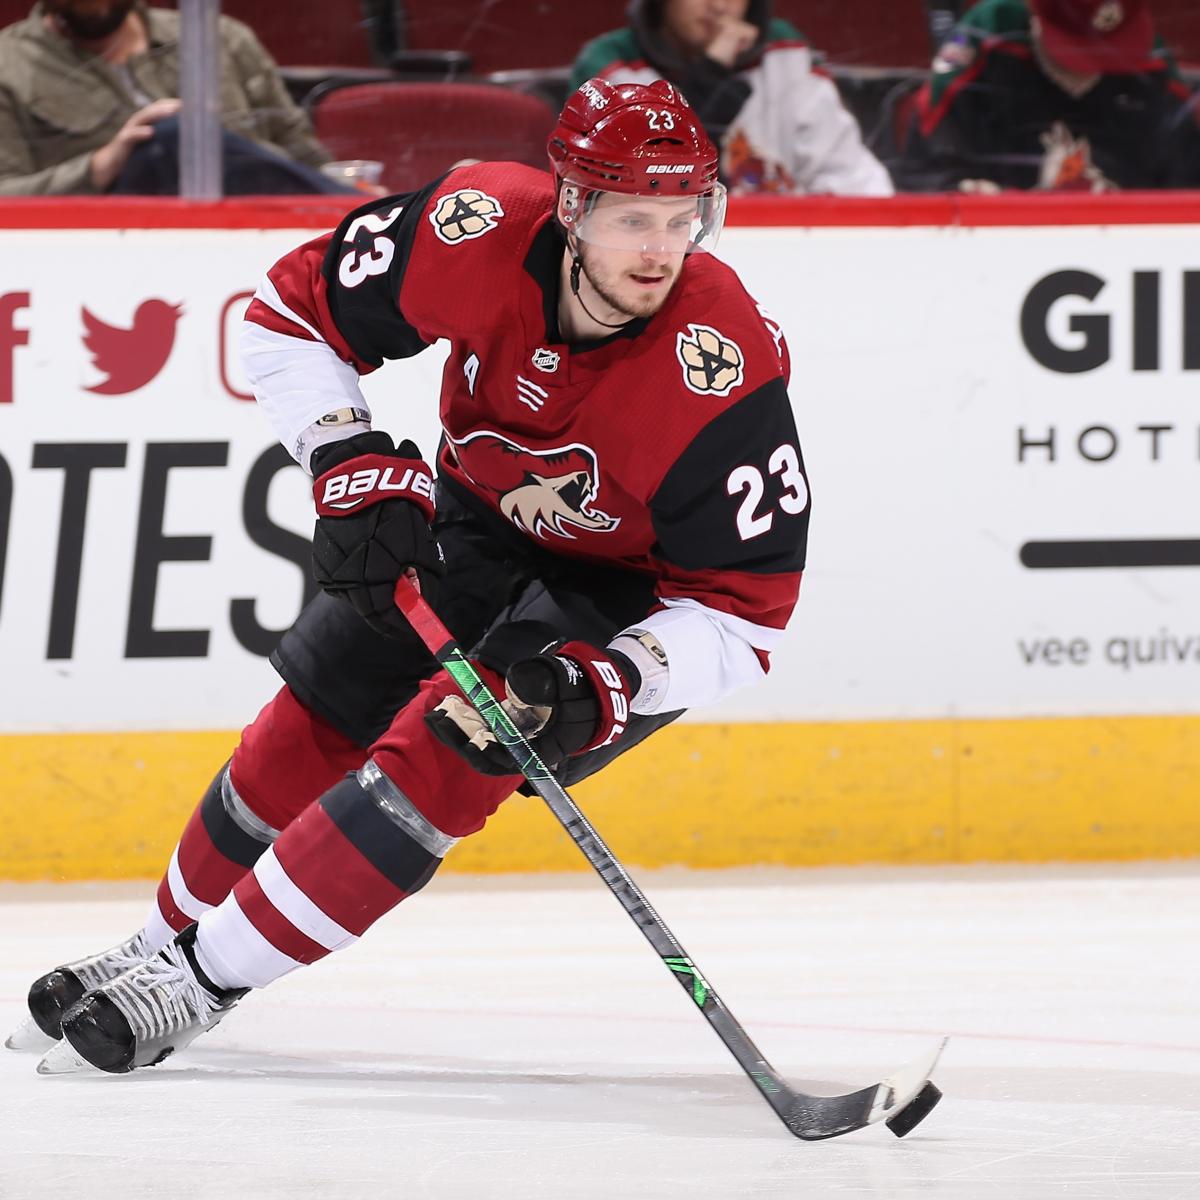 Oliver Ekman-Larsson: Being Honest - NHL's Most Stylish, His Horse Tattoo &  Getting NHL Autographs 